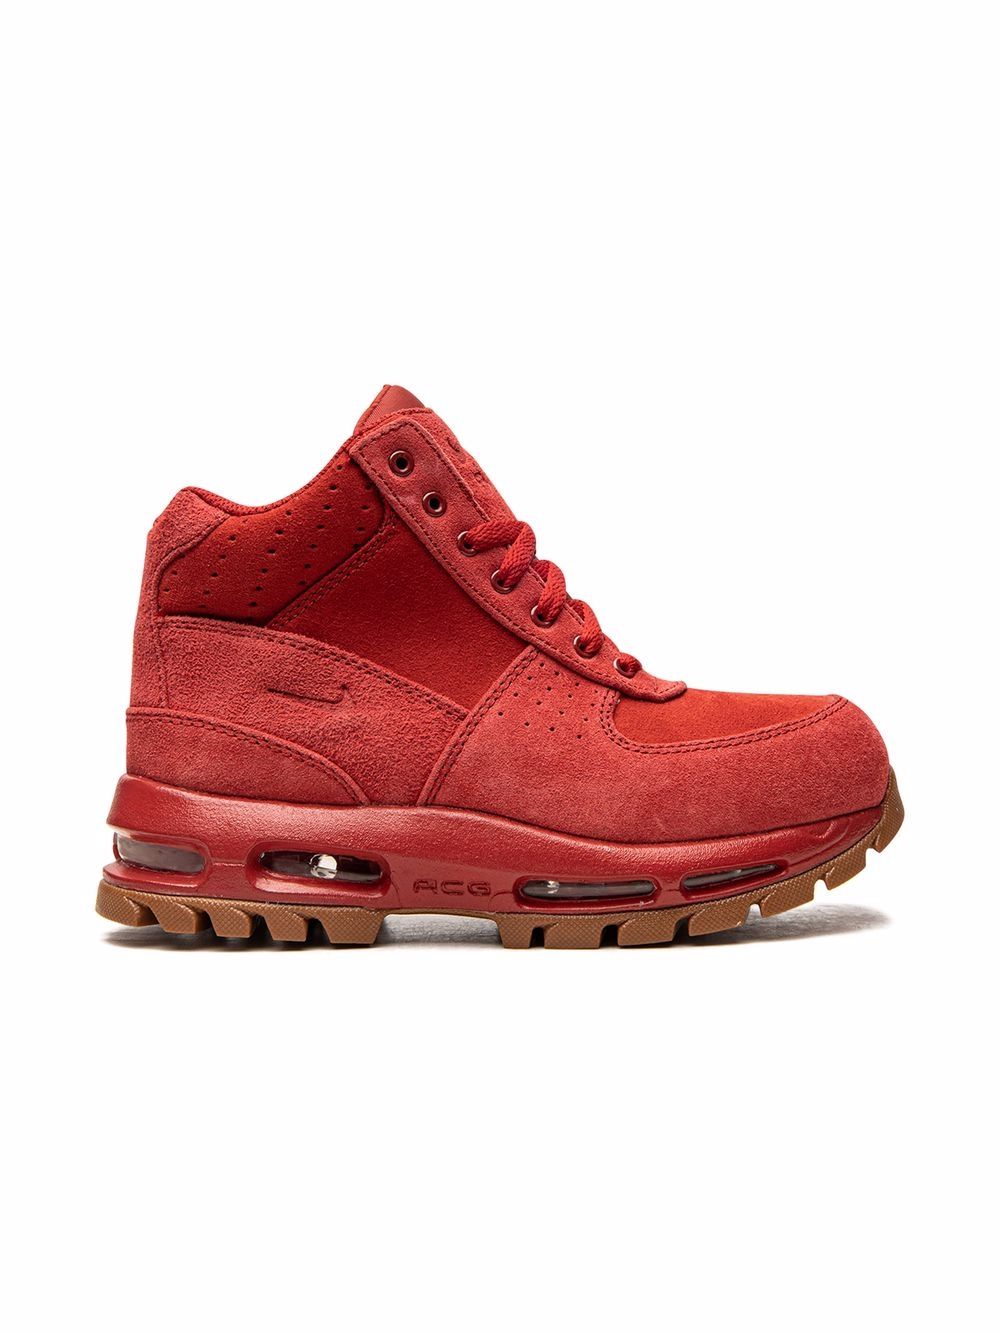 Image 2 of Nike Kids Air Max Goadome "Gym Red" sneakers